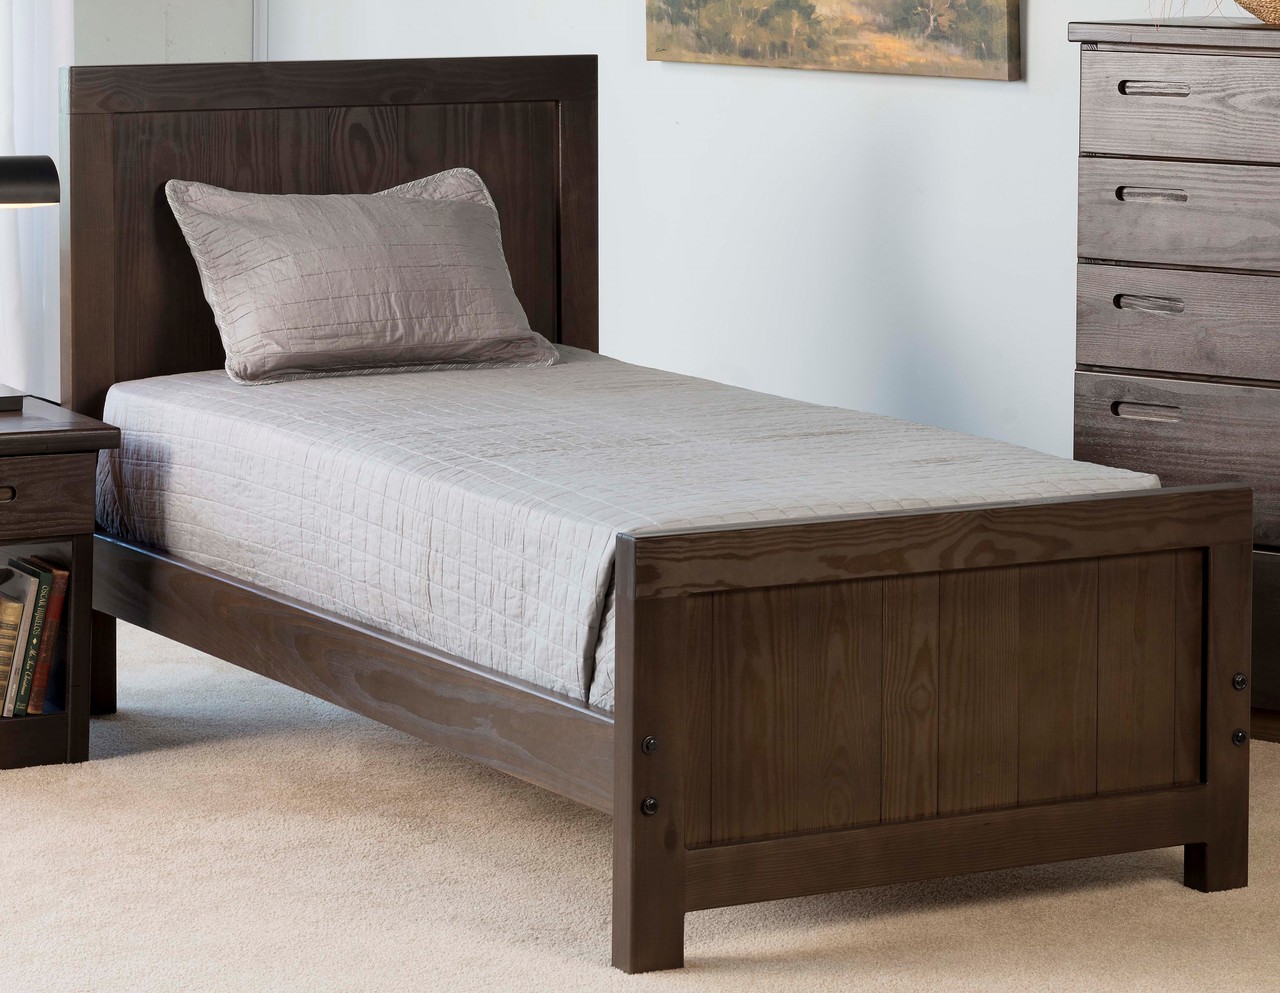 complete twin bed with mattress